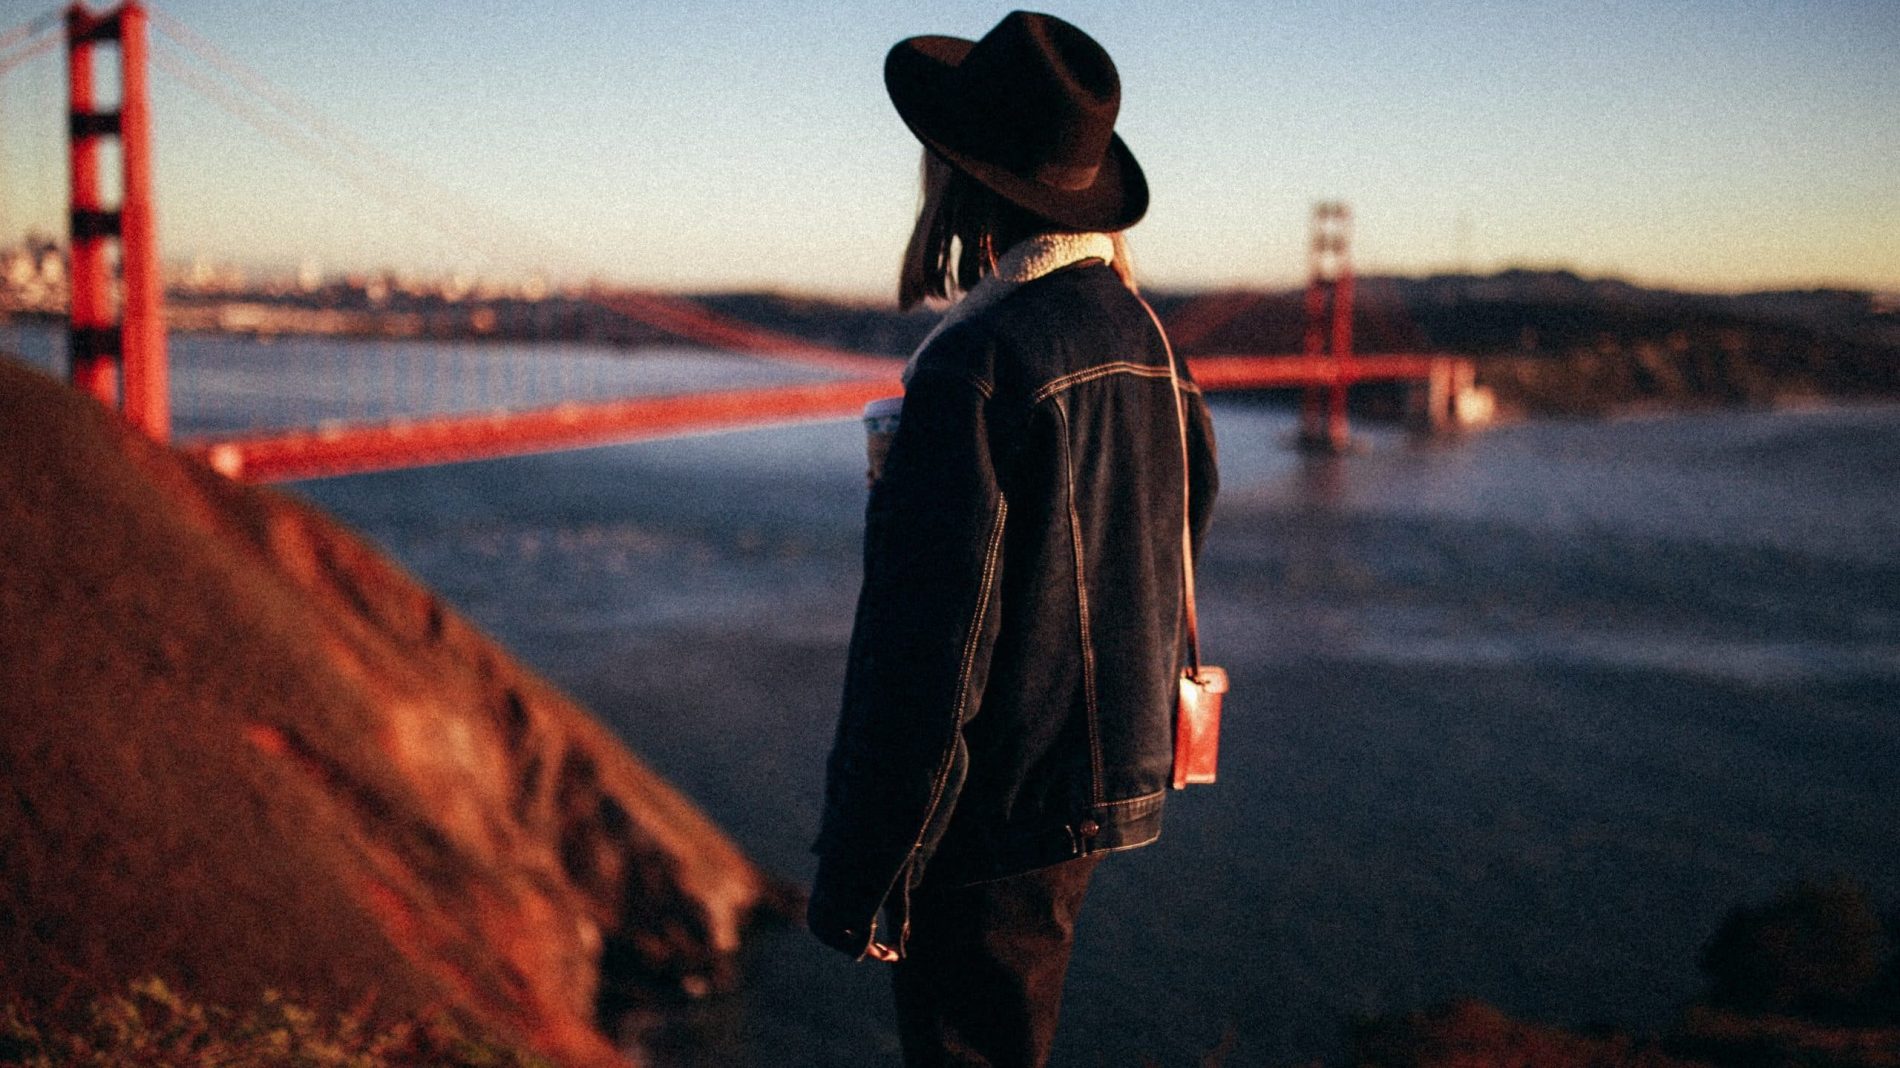 Photo of a person wearing a hat and staring at the Golden Gate Bridge in the distance